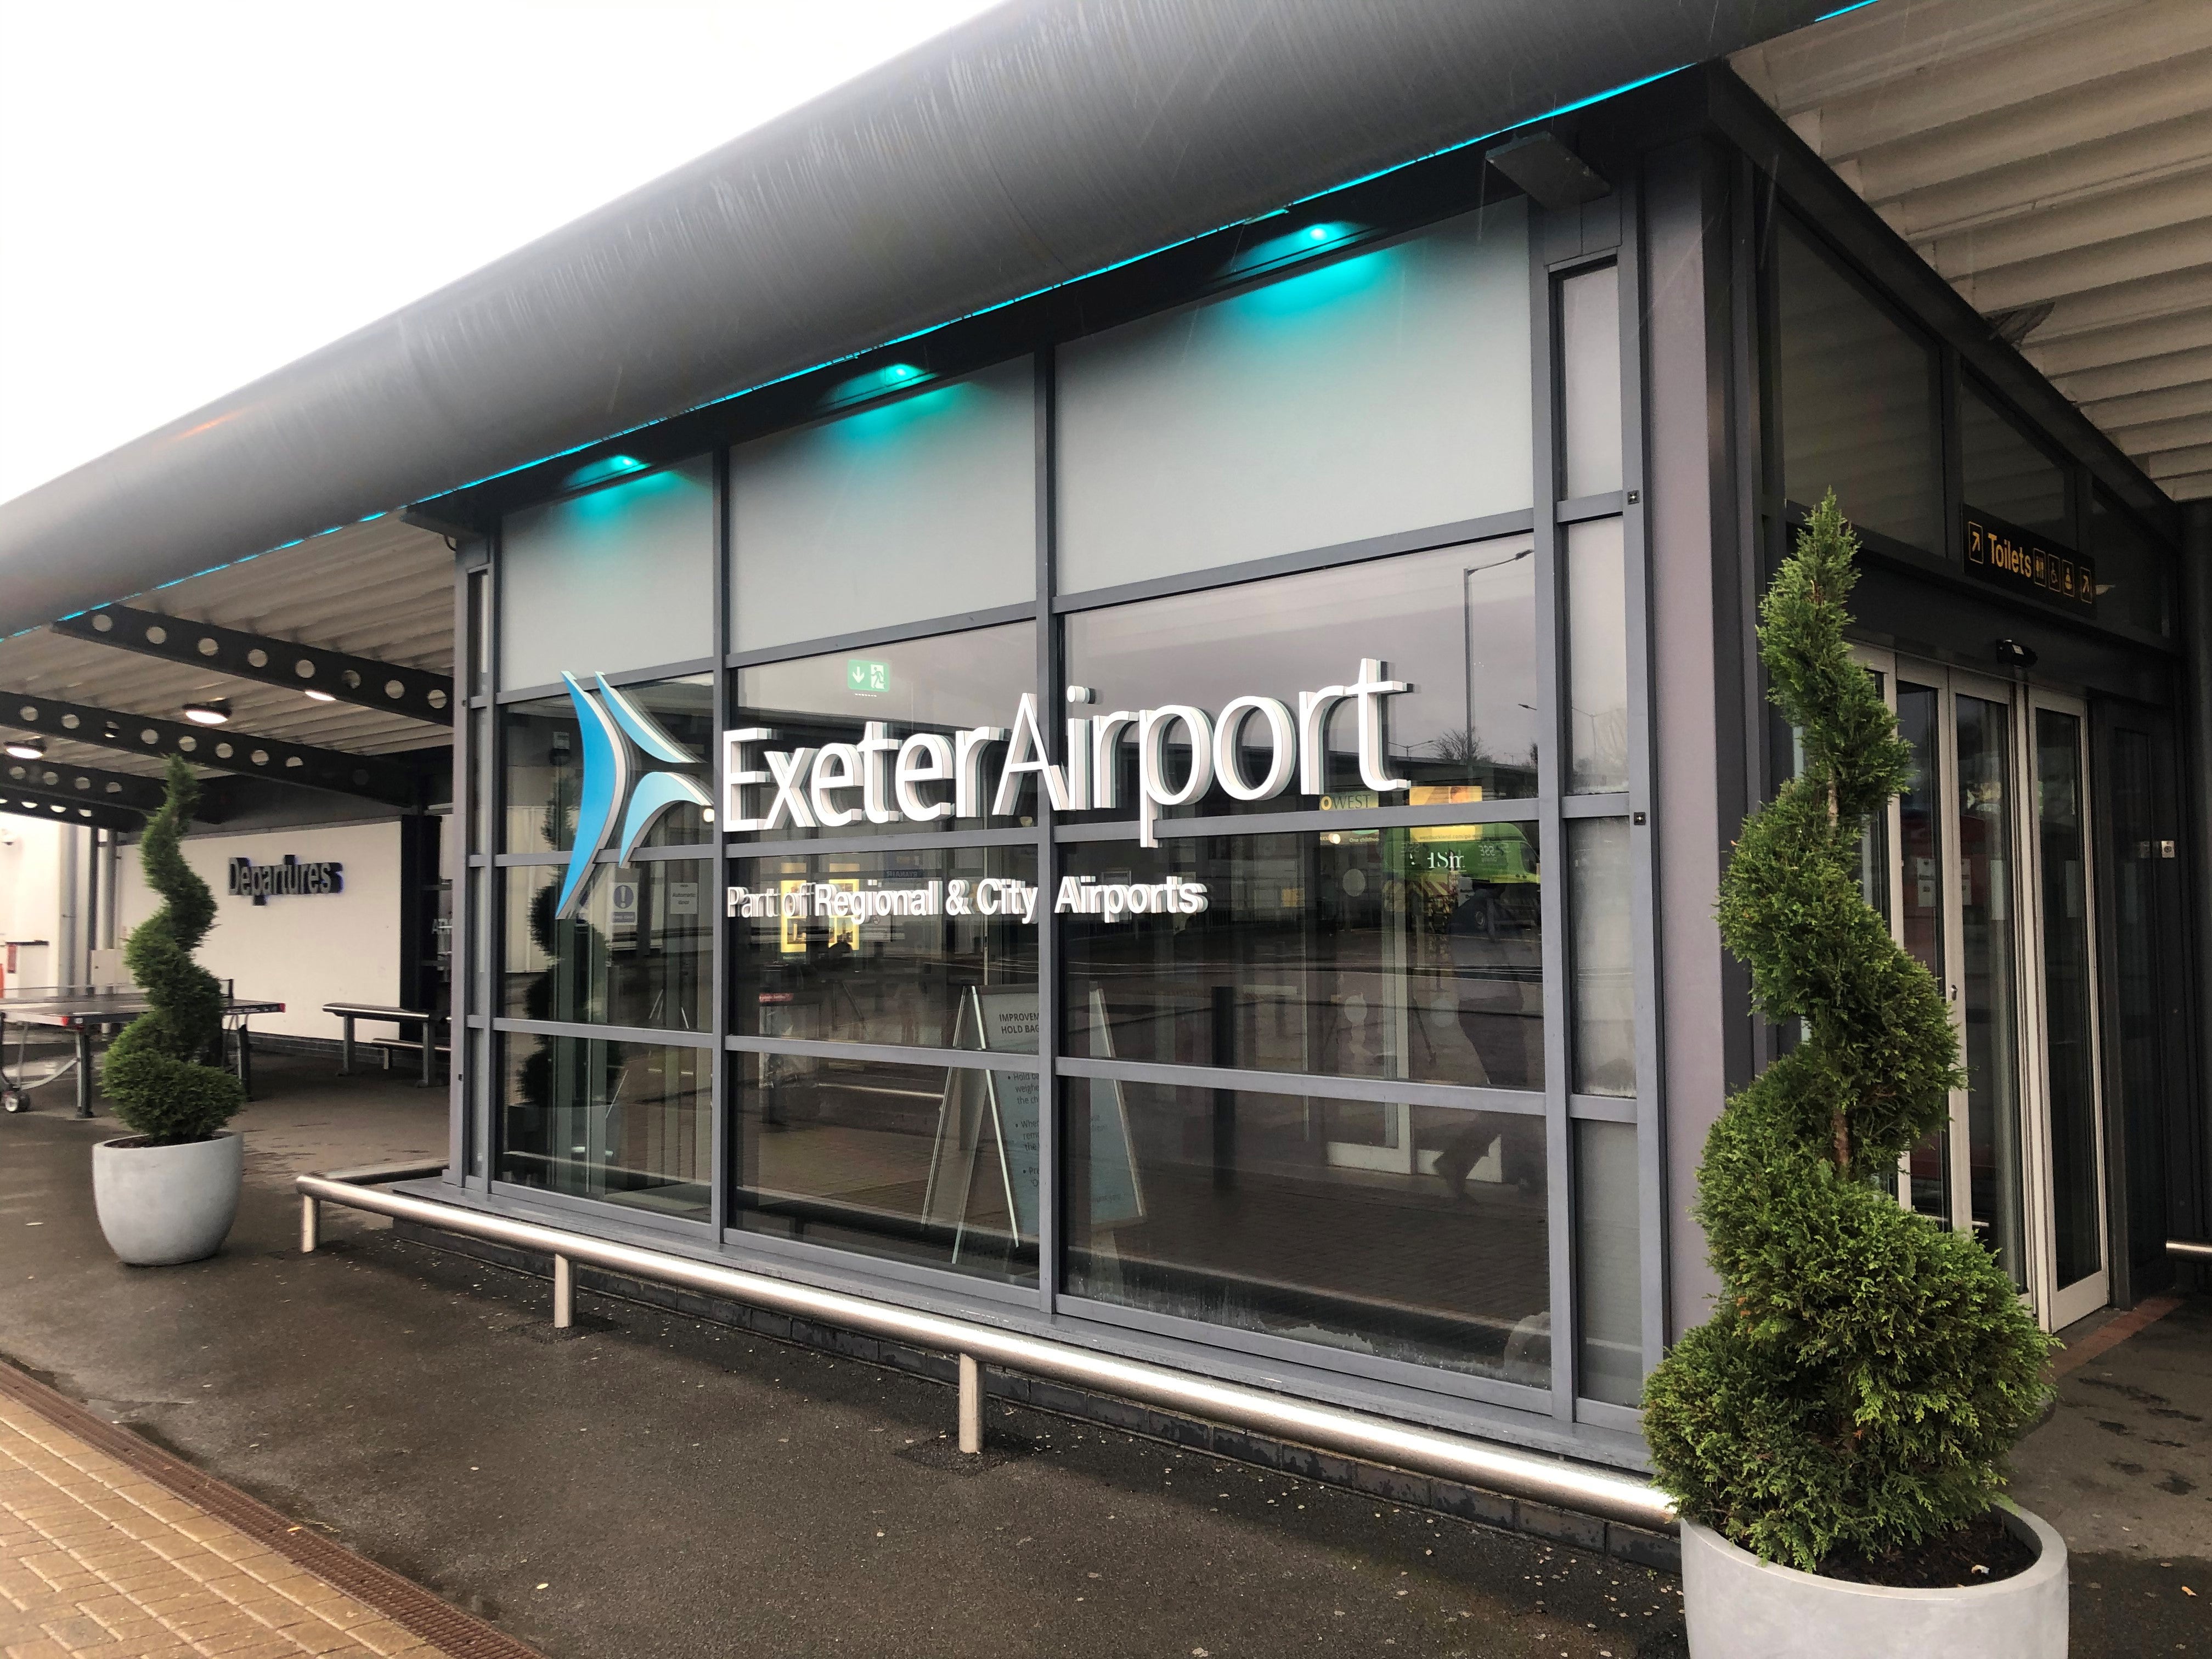 The plane emergency landed at Exeter Airport